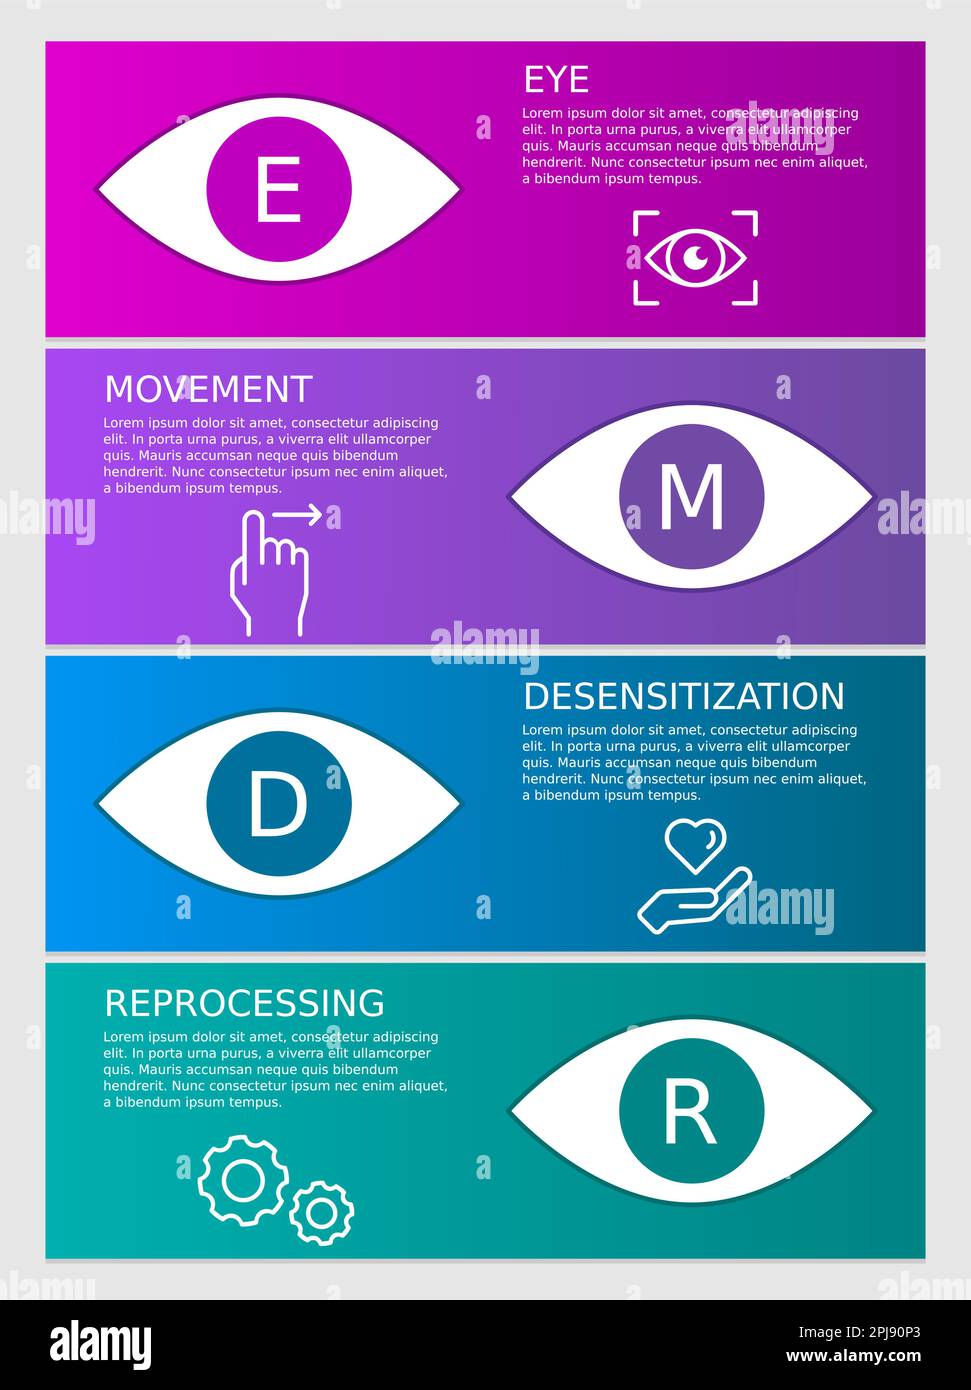 EMDR therapy infographic. Eye Movement Desensitization and Reprocessing. Mental health PTSD treatment technique. Psychotherapy form to heal. Vector Stock Vector